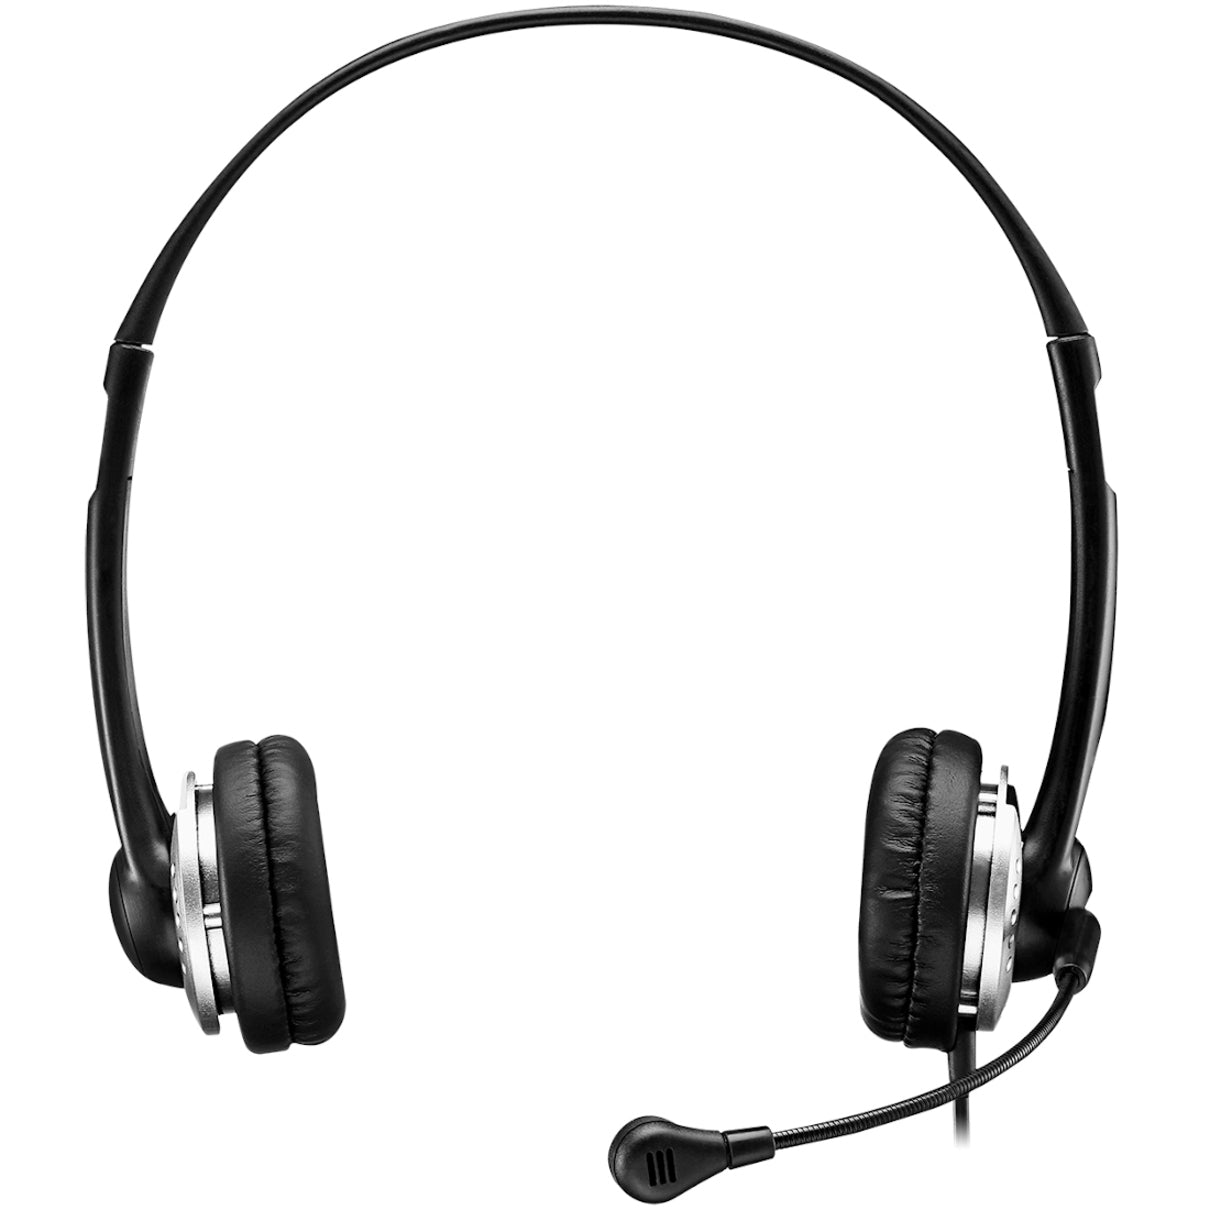 Adesso XTREAM P2 USB Wired Headset with Built-in Microphone, Over-the-head, Noise Cancelling, 1 Year Warranty